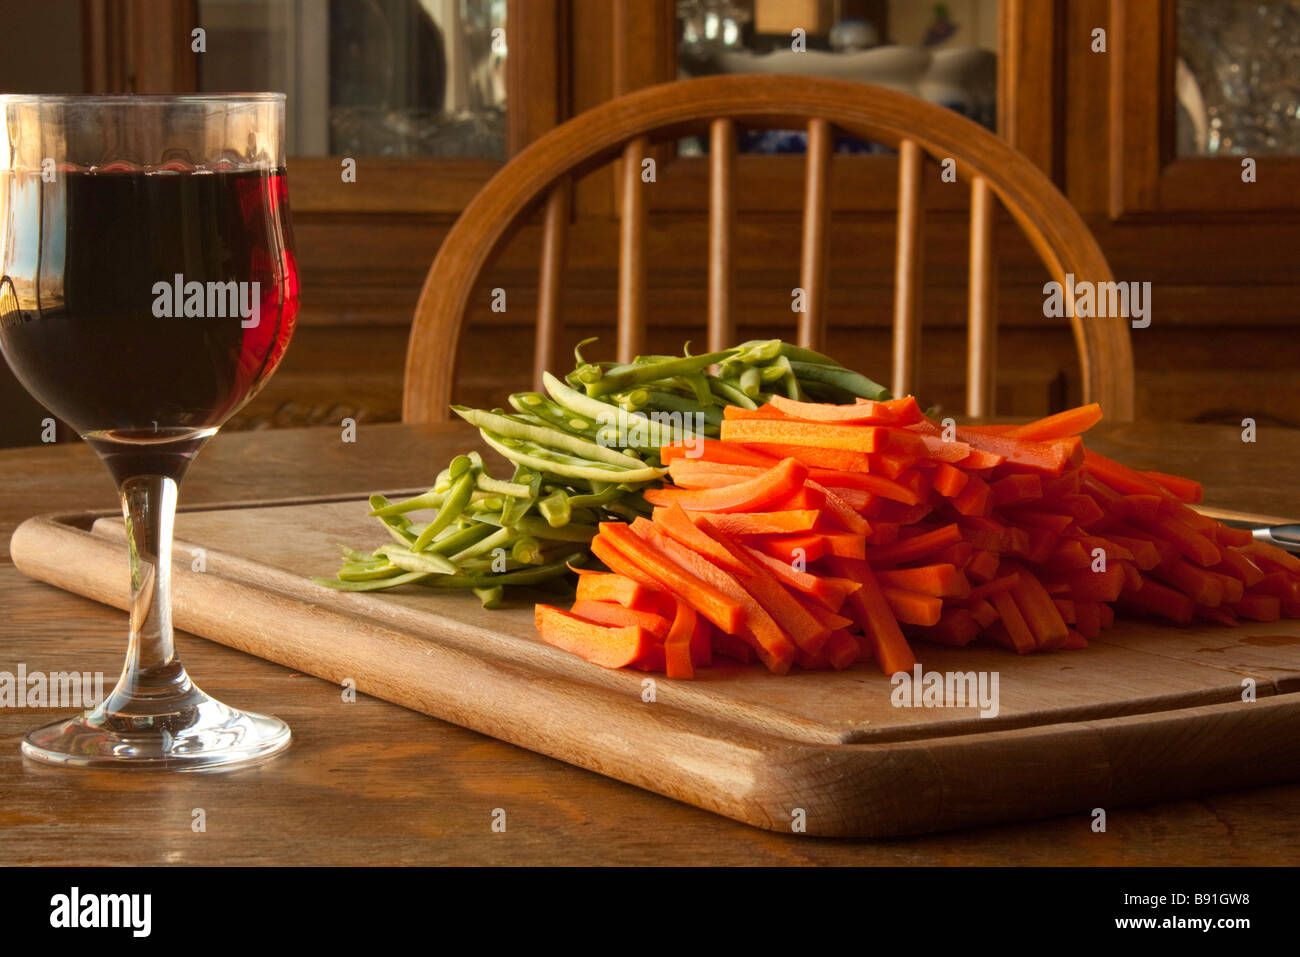 A cutting board with jullienned carrots and green beans with a knife and a glass of wine for the chef Stock Photo